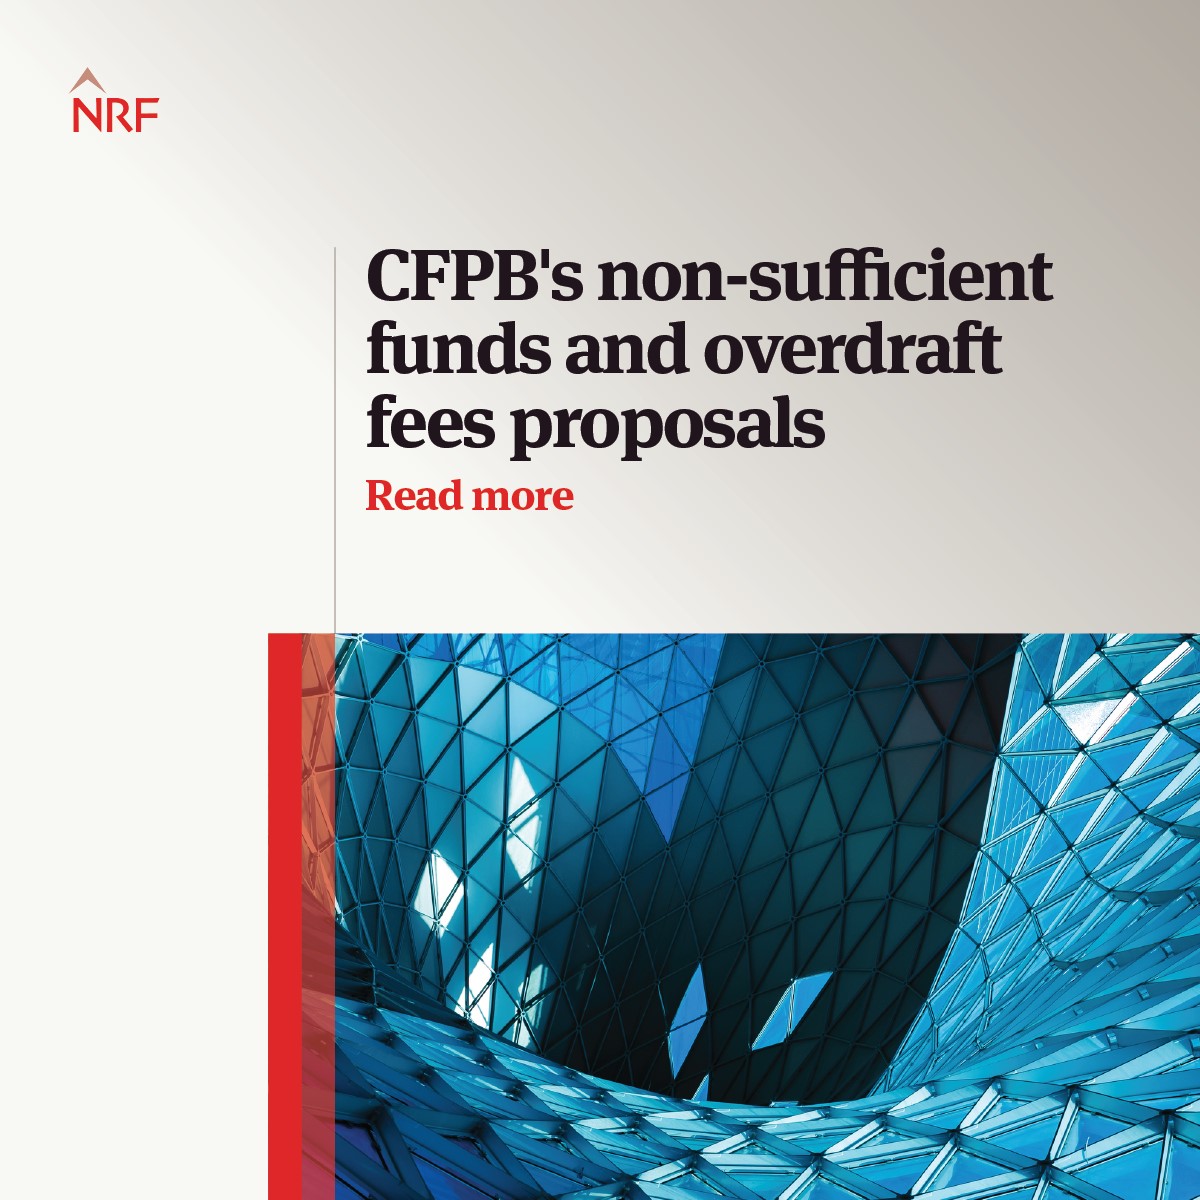 In their article for The Banking Law Journal, Tom Delaney, Tim Byrne, Eamonn Moran and Cat McManus discuss rules proposed recently by the Consumer Financial Protection Bureau that would limit the imposition of non-sufficient funds fees and overdraft fees. ow.ly/3Fsv50RtV2f